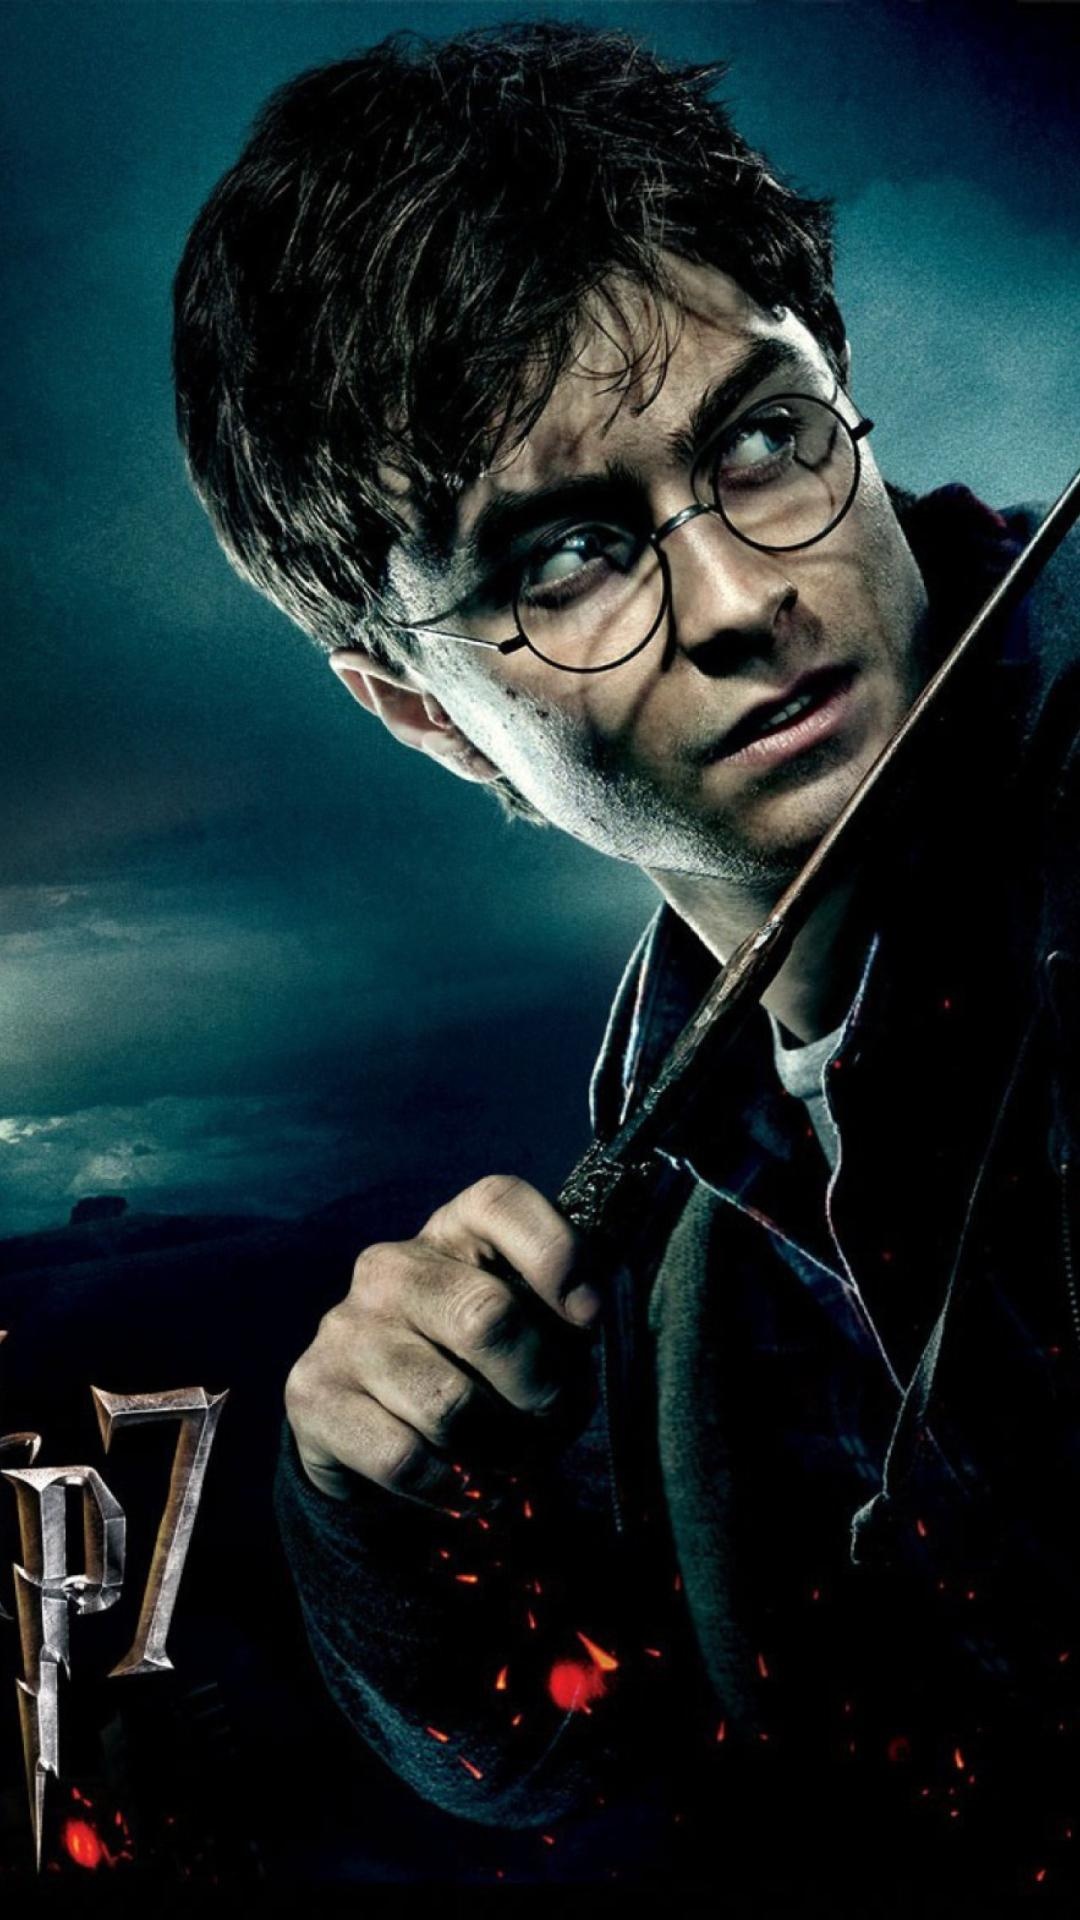 Deathly Hallows, iPhone wallpapers, Harry Potter, 1080x1920 Full HD Handy